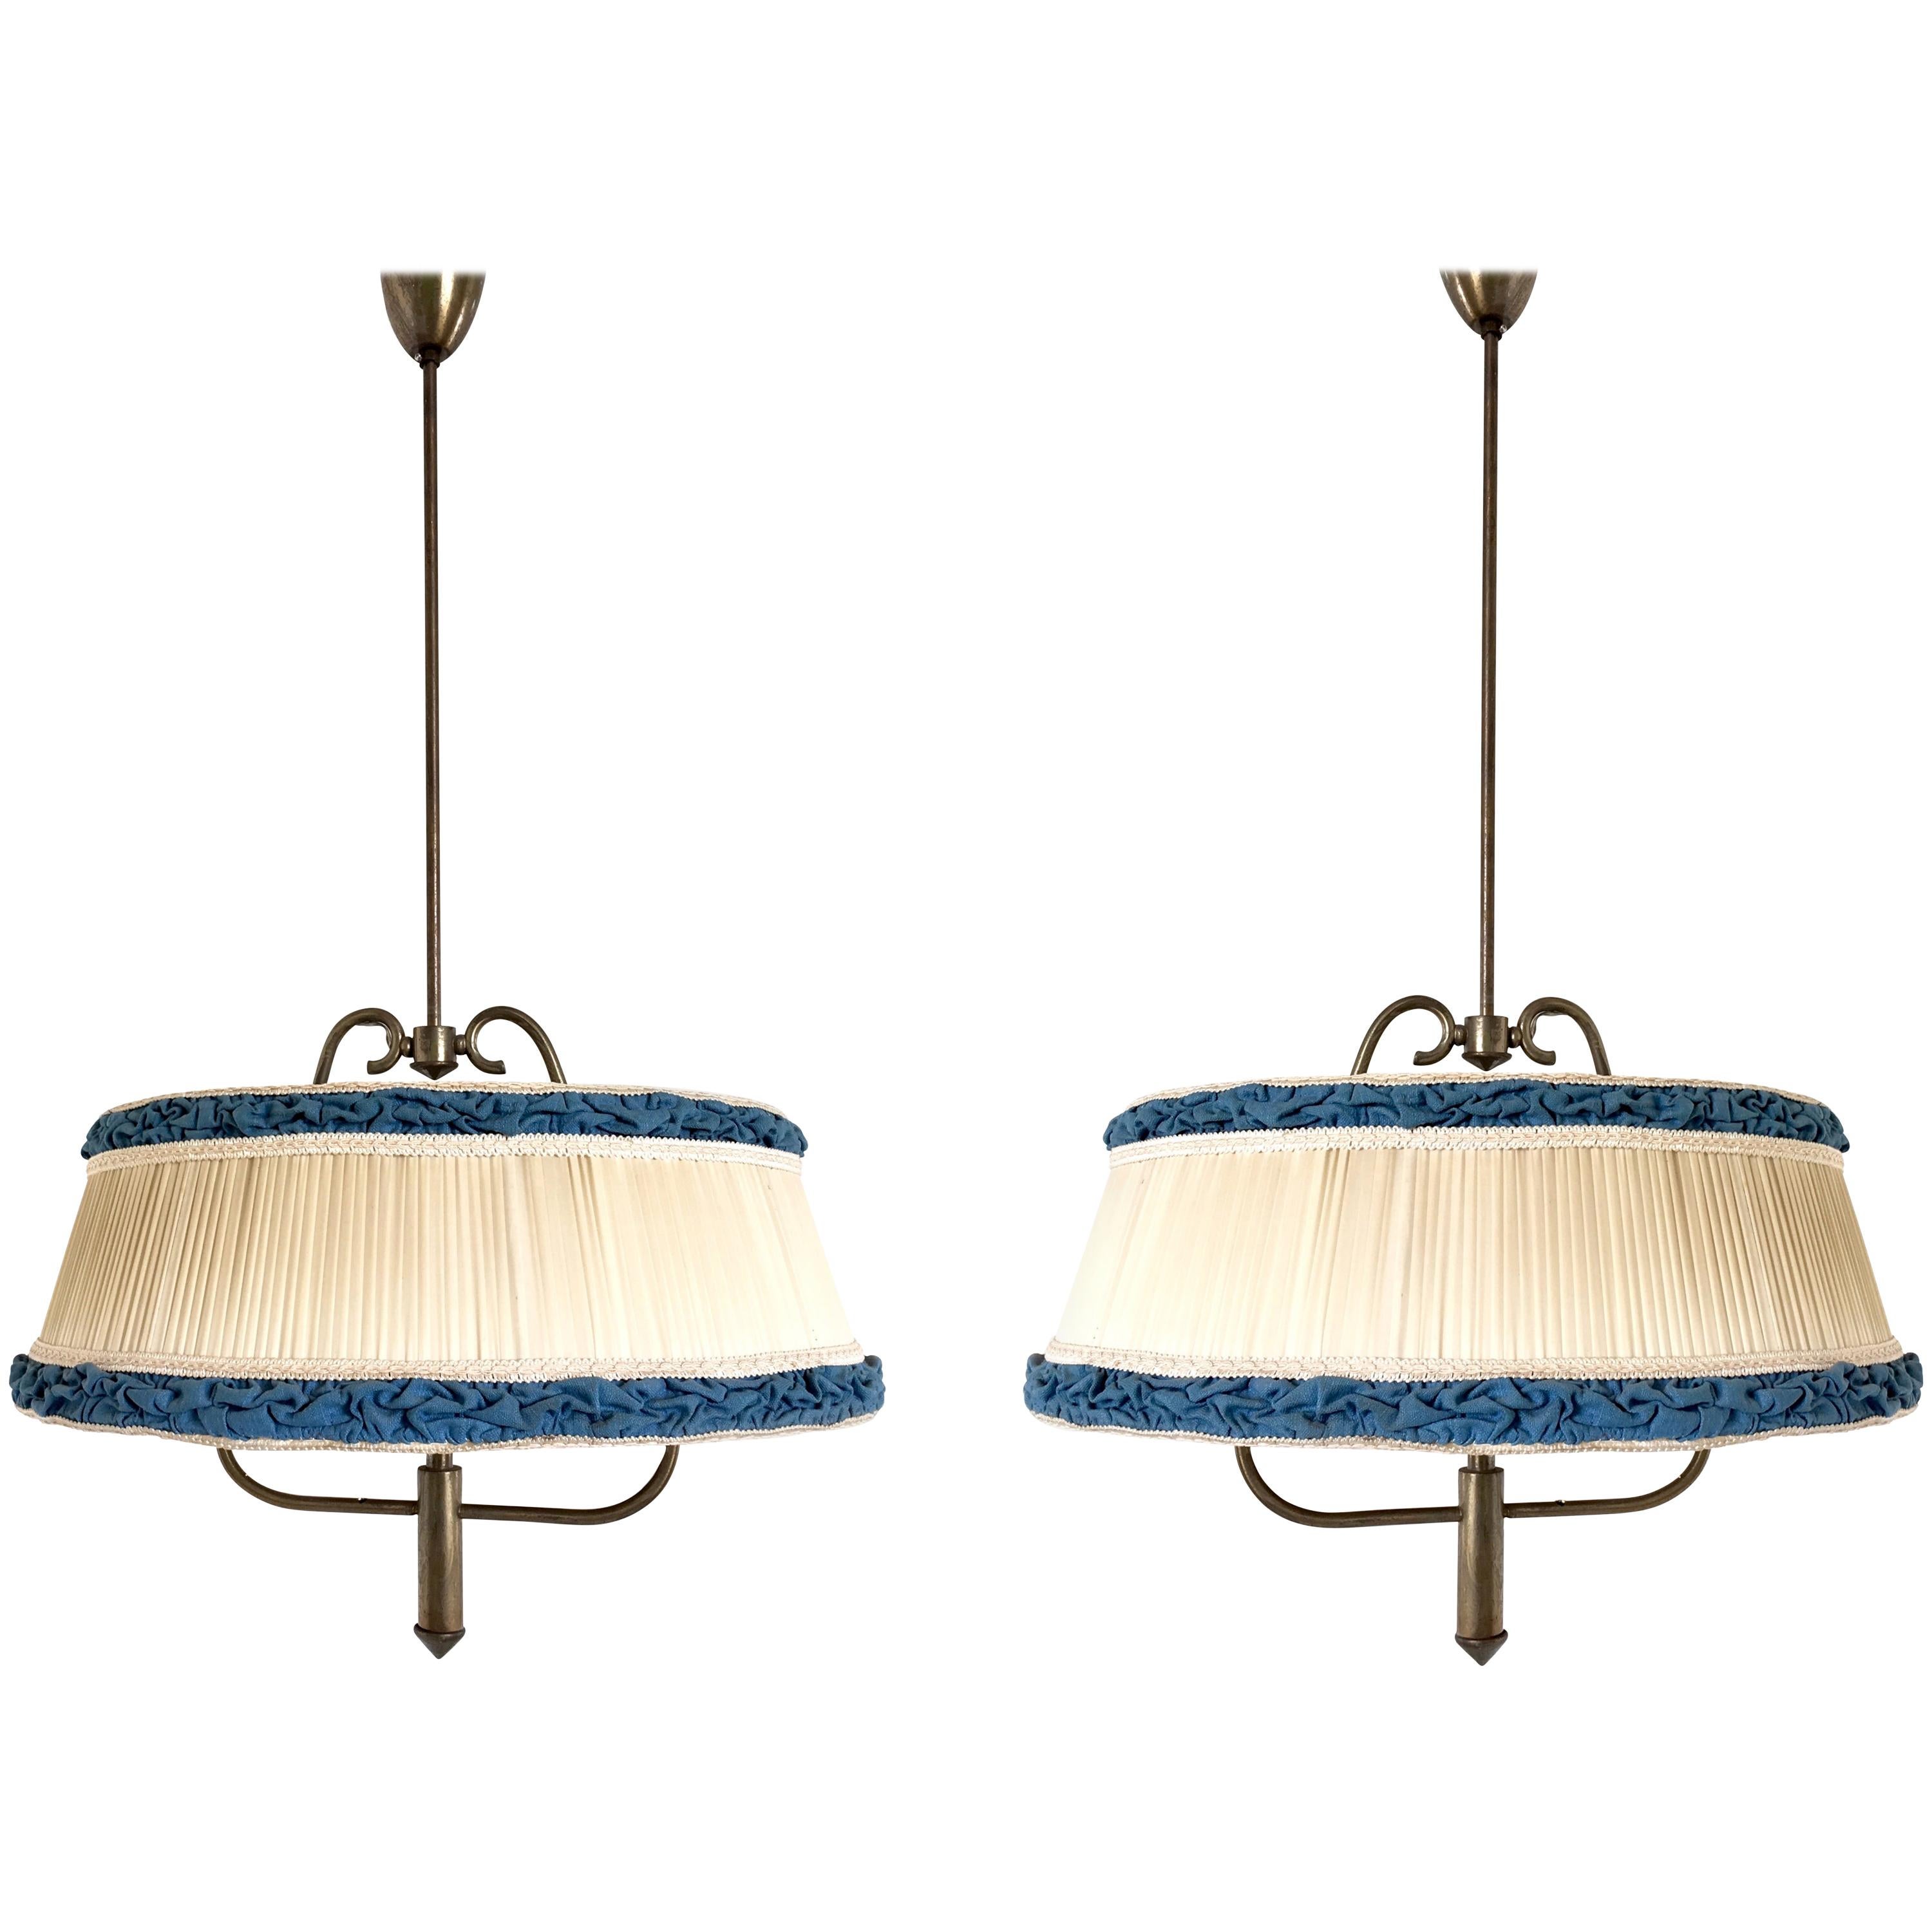 Pair of Midcentury Pendants with Ivory and Blue Fabric Lampshades, Italy